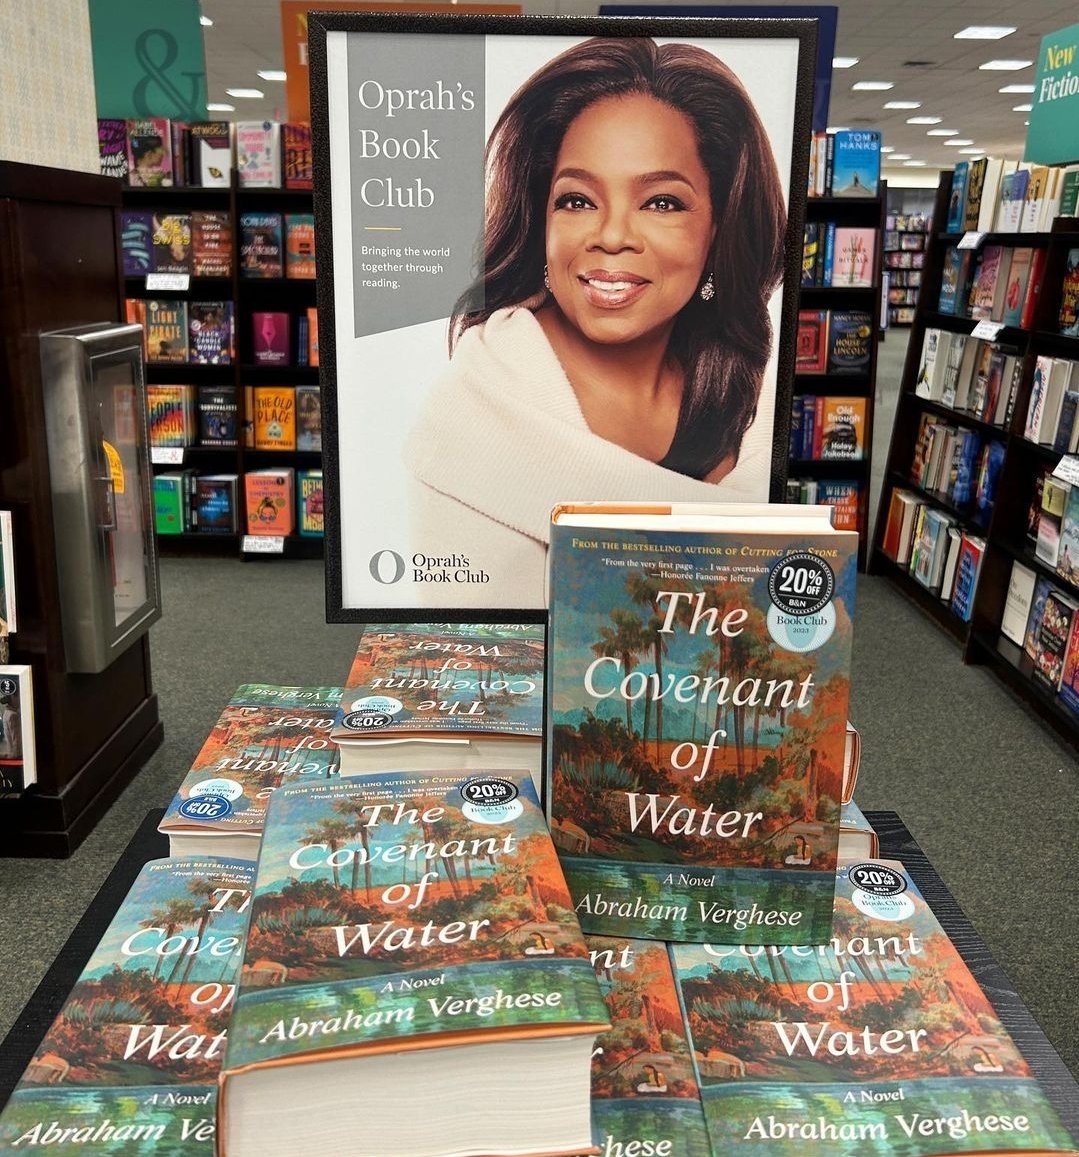 Oprah’s Book Club selects books that engender conversation, spark enlightenment, help launch emerging authors, and reacquaint us with the already prominent. The Covenant of Water is one of the newest picks!#oprahsbookclub #thecovenantofwater #newbook #bookstagram  #bnbookfun